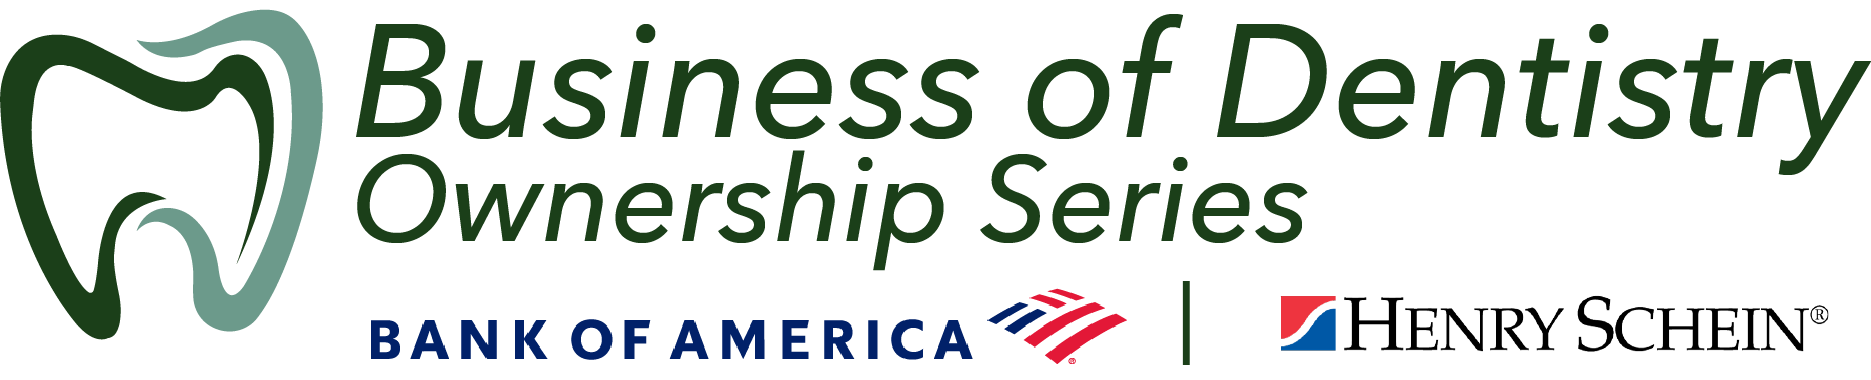 Business of Dentistry Ownership Series. Bank of America, Henry Schein